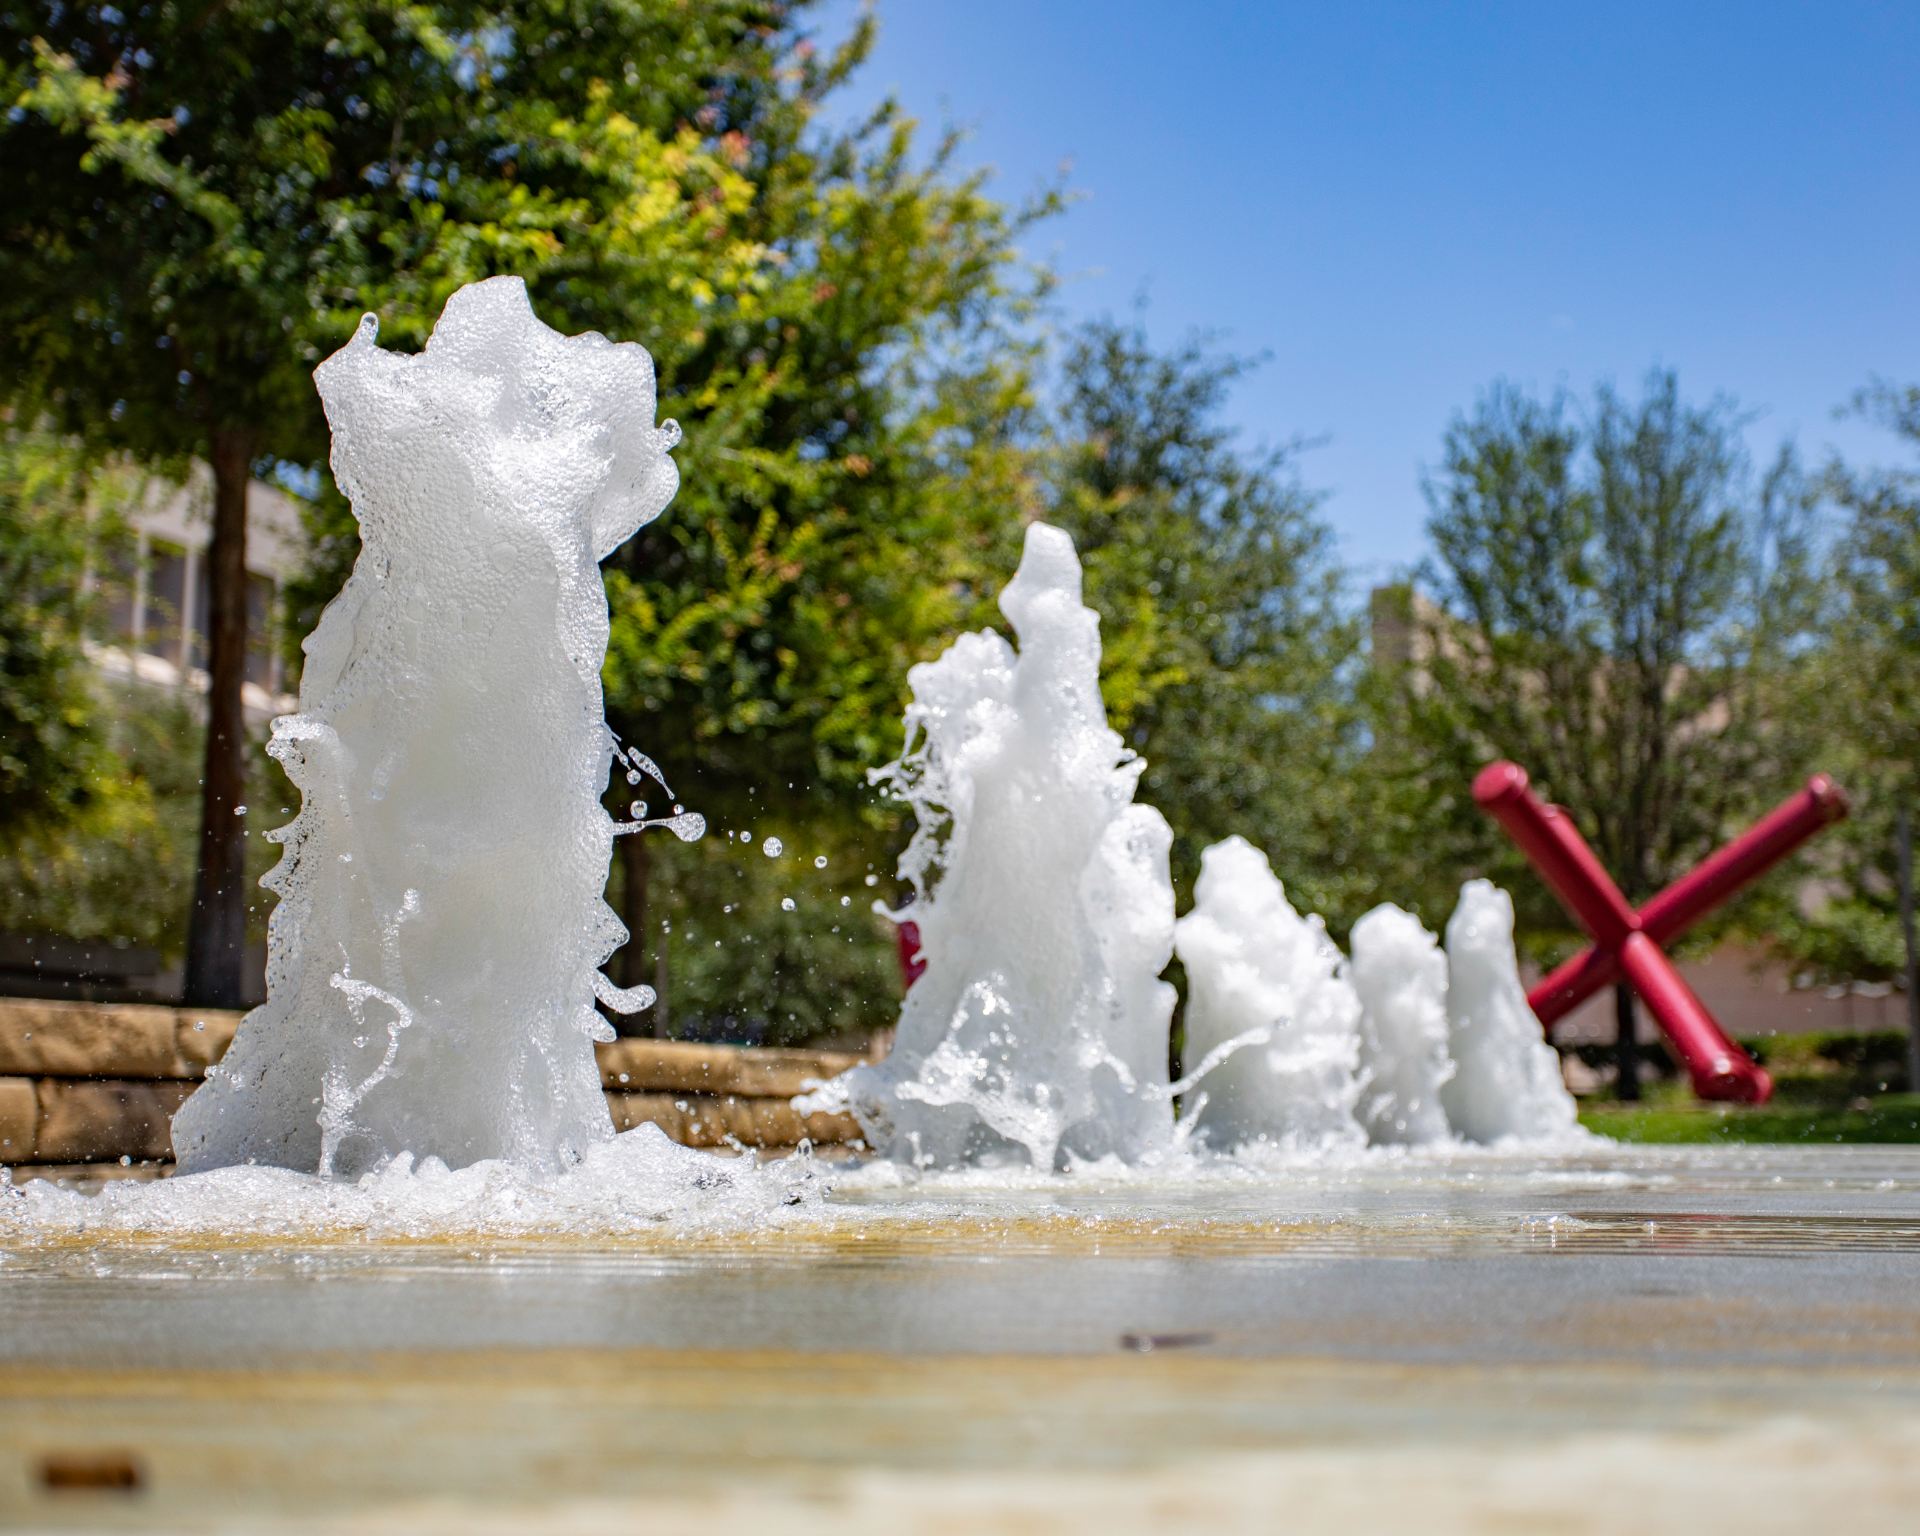 Fountains at Founders Plaza